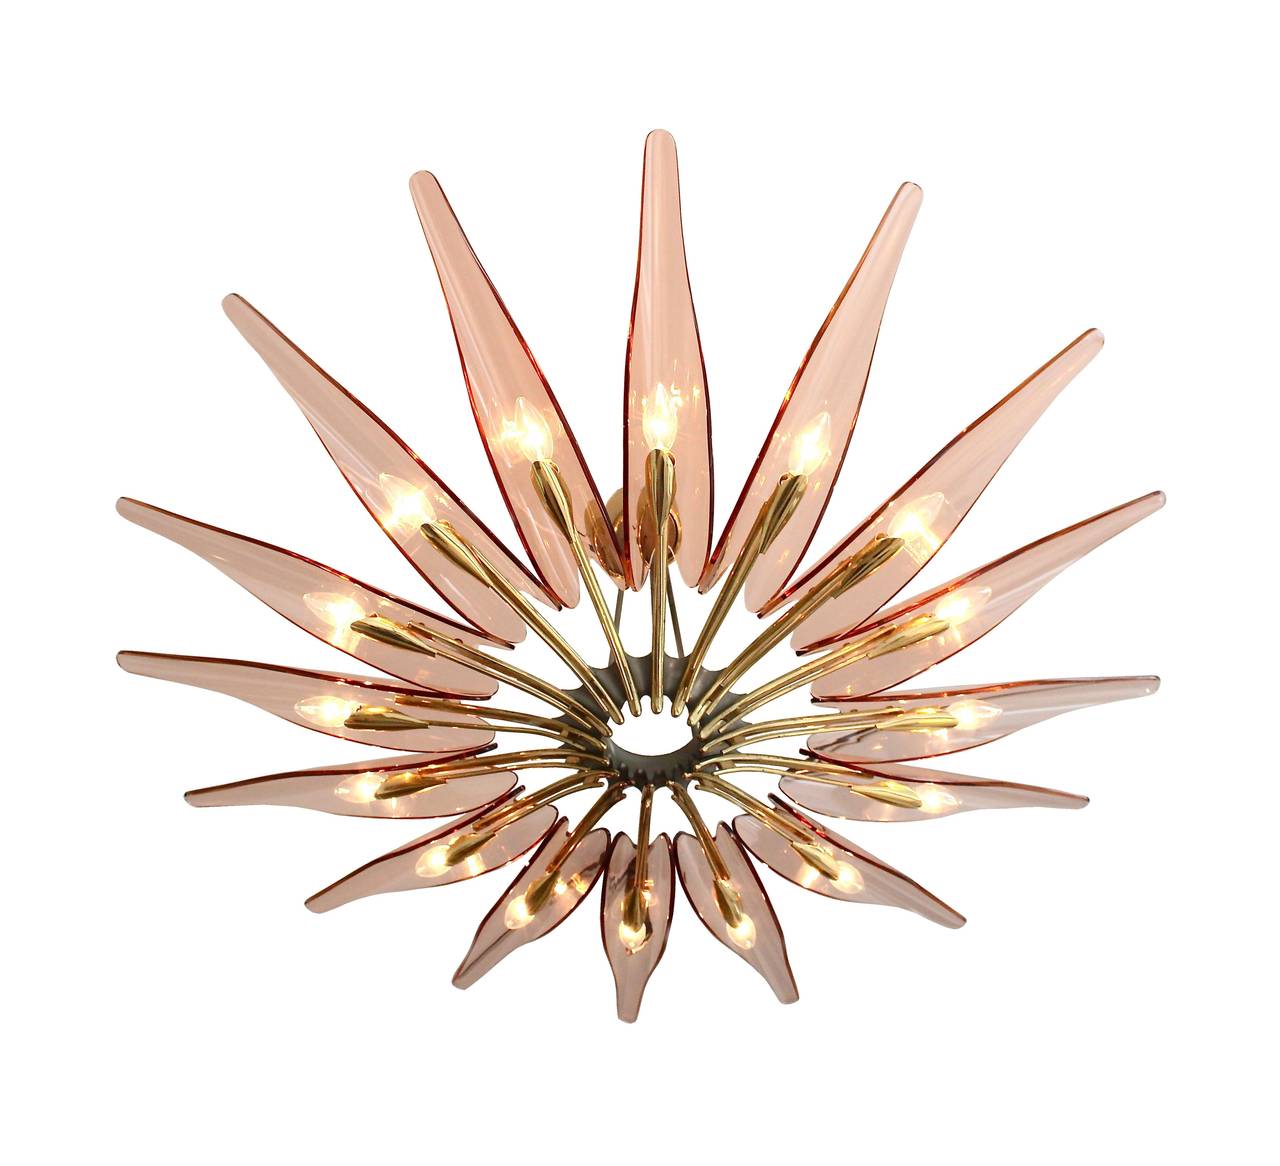 Chandelier in brass and nickelled brass with 16 colored glass 'petals' by Max Ingrand.
Manufactured by Fontana Arte, model no. 1563A.
Documented in 'Illuminazione Quaderni Fontana Arte 1' 1960s.